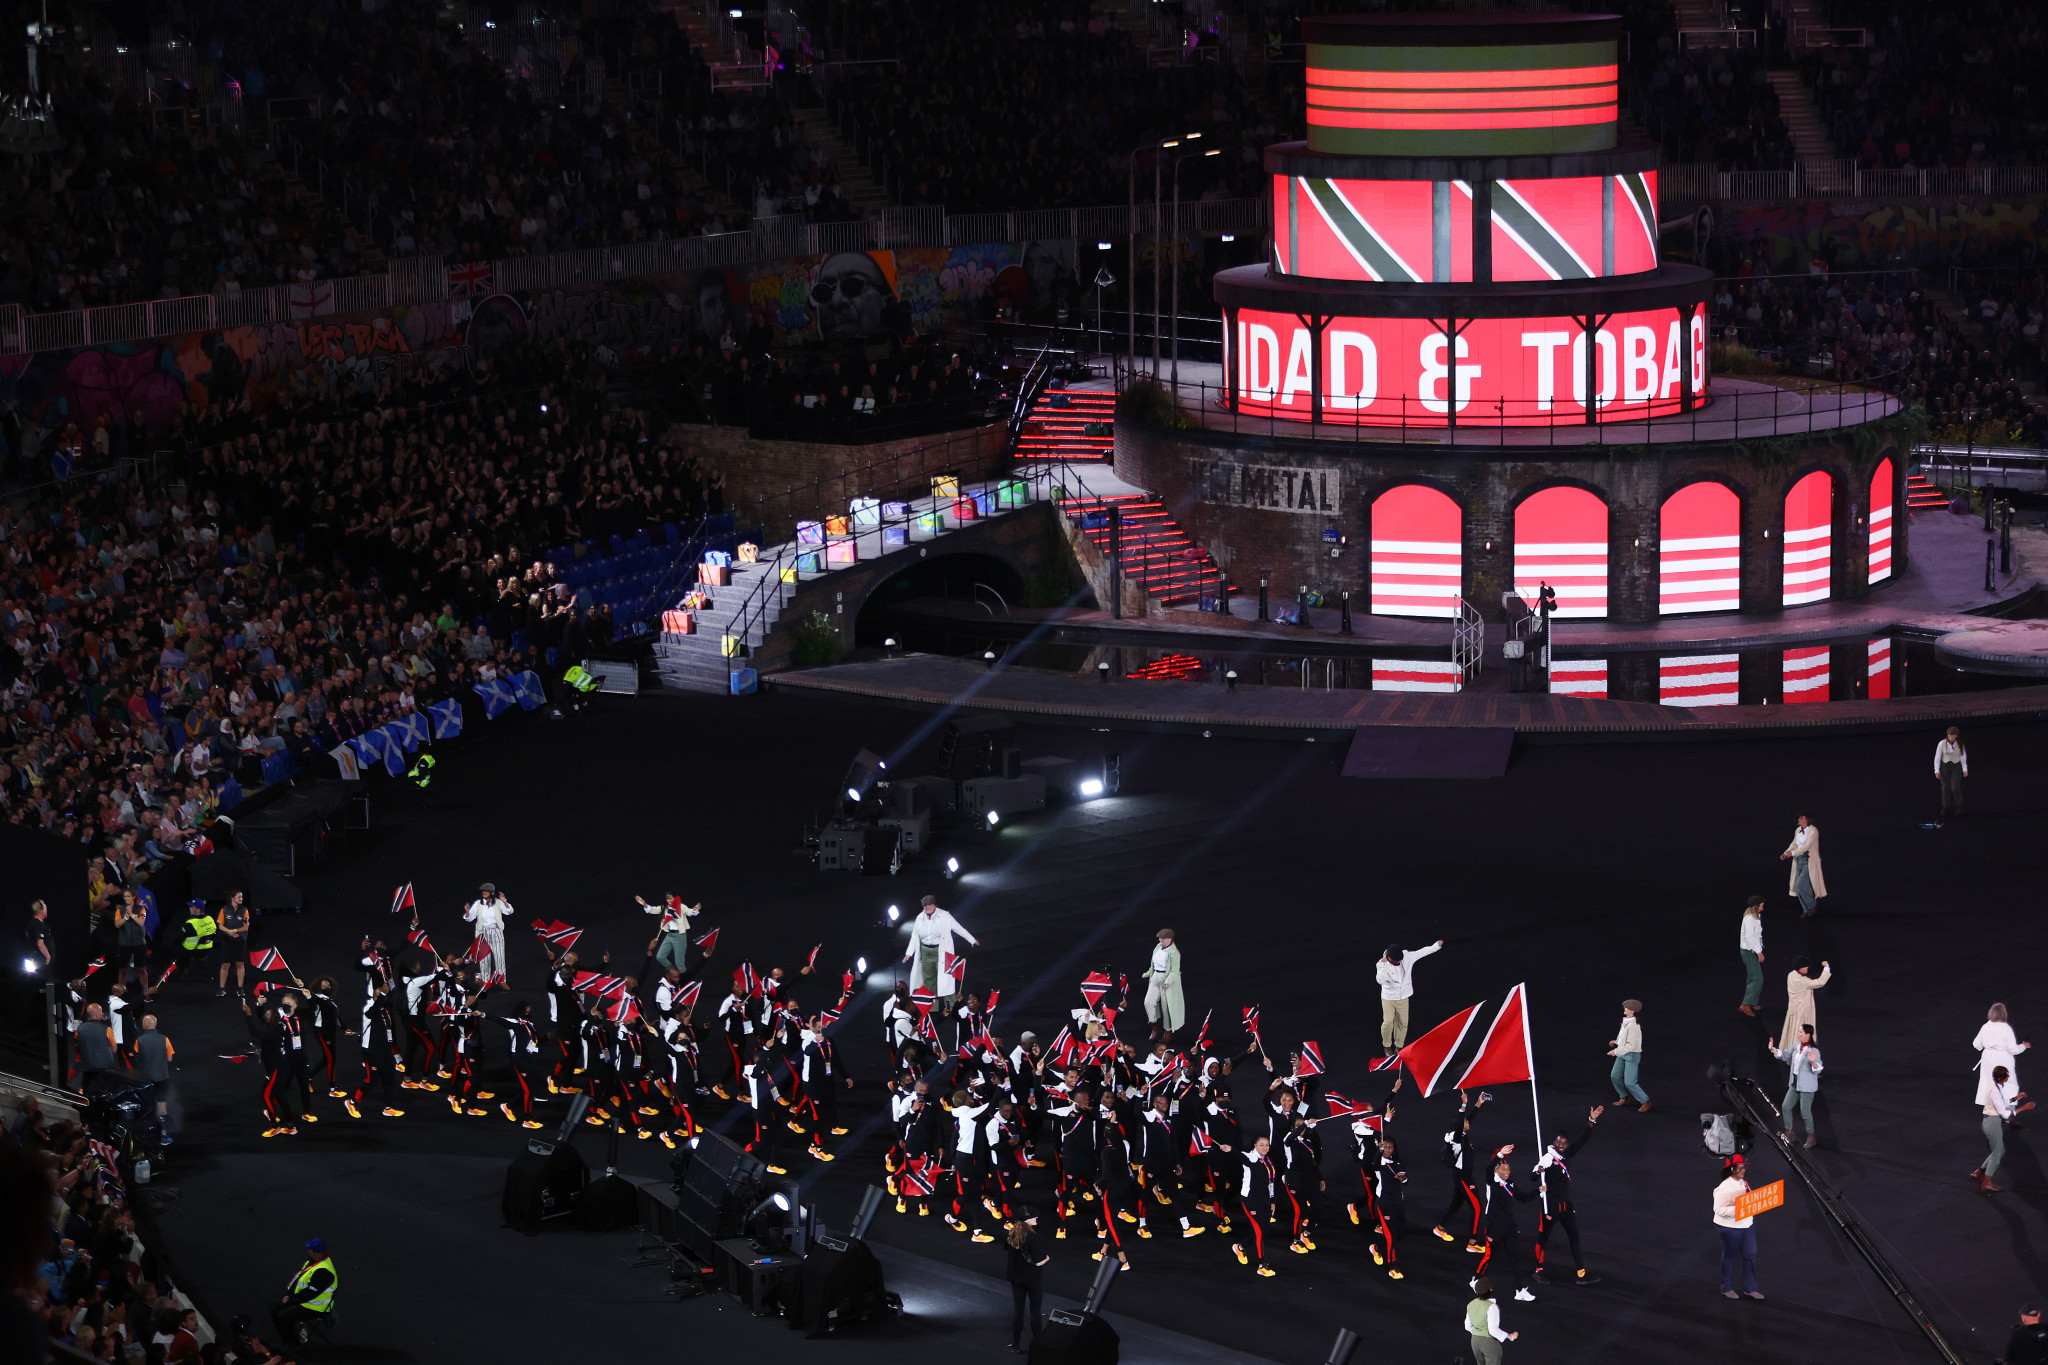 Trinbago 2023 receives assurances over flights between islands for Commonwealth Youth Games